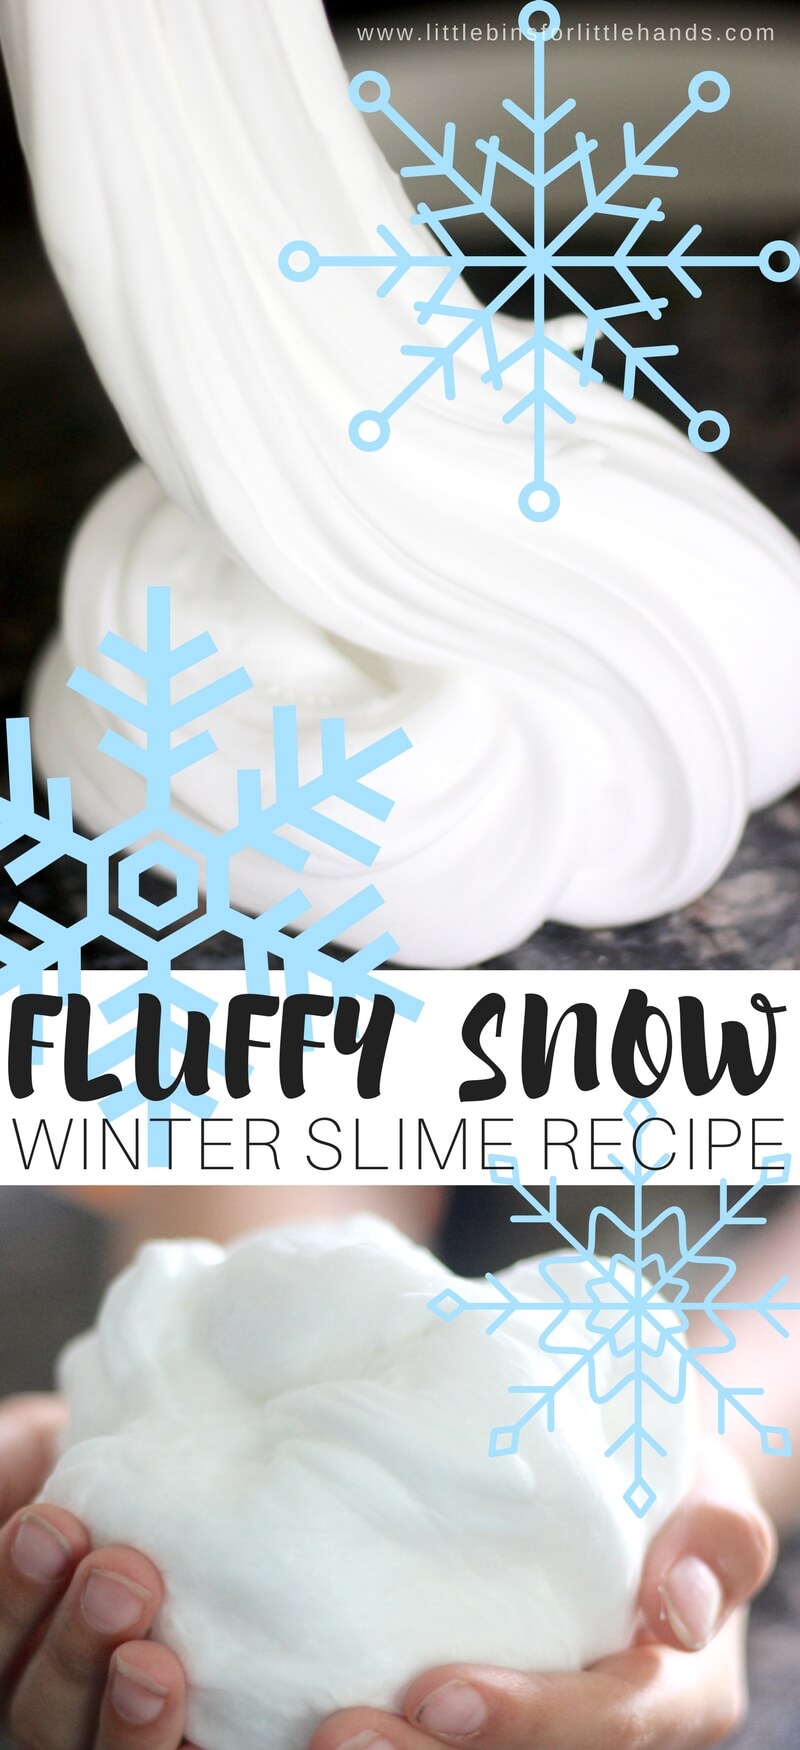 Even if the weather isn't calling for snow outdoors, we can make our own homemade fluffy snow slime recipe indoors! Plus this one isn't nearly as cold and you don't need mittens to handle it. Our fluffy slime recipe is by far the coolest slime recipe we love to make. I just had to make a snowball fluffy slime to go along with our melting snowman slime. It's a slime addiction.